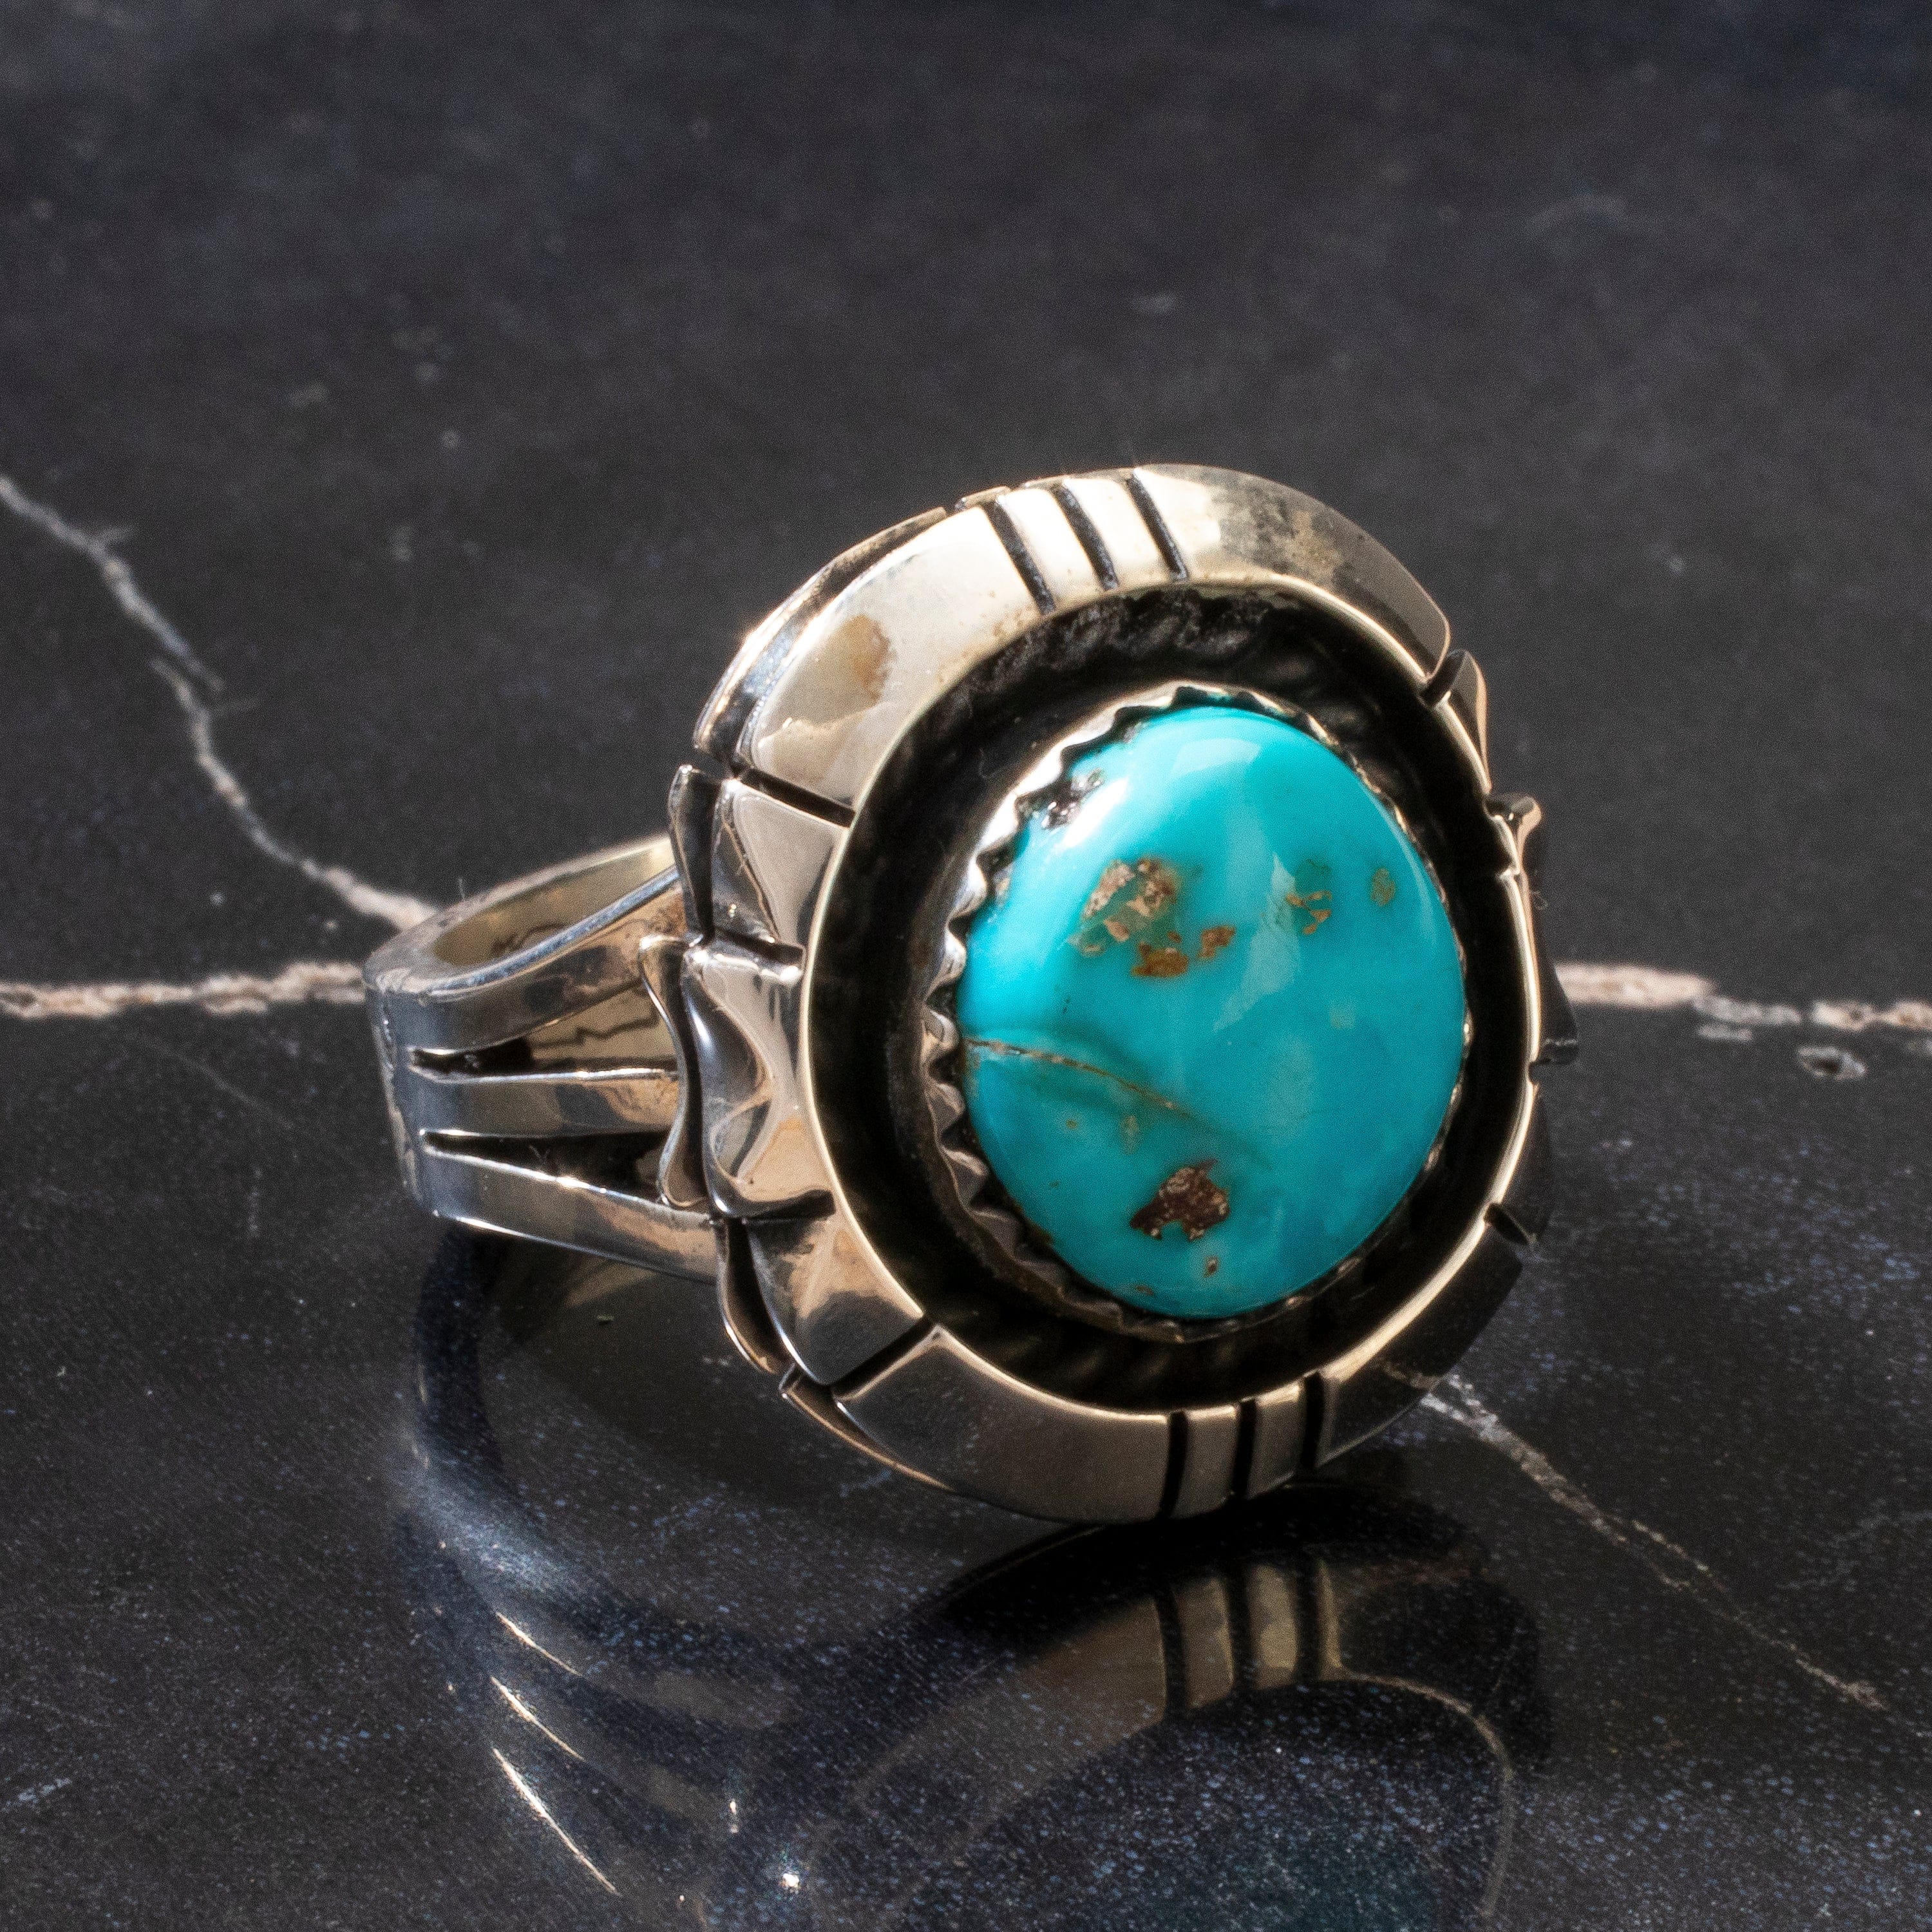 Kalifano Native American Jewelry 6 Joe Piaso Jr. Sleeping Beauty Turquoise Feather Navajo USA Native American Made 925 Sterling Silver Ring NAR600.052.6